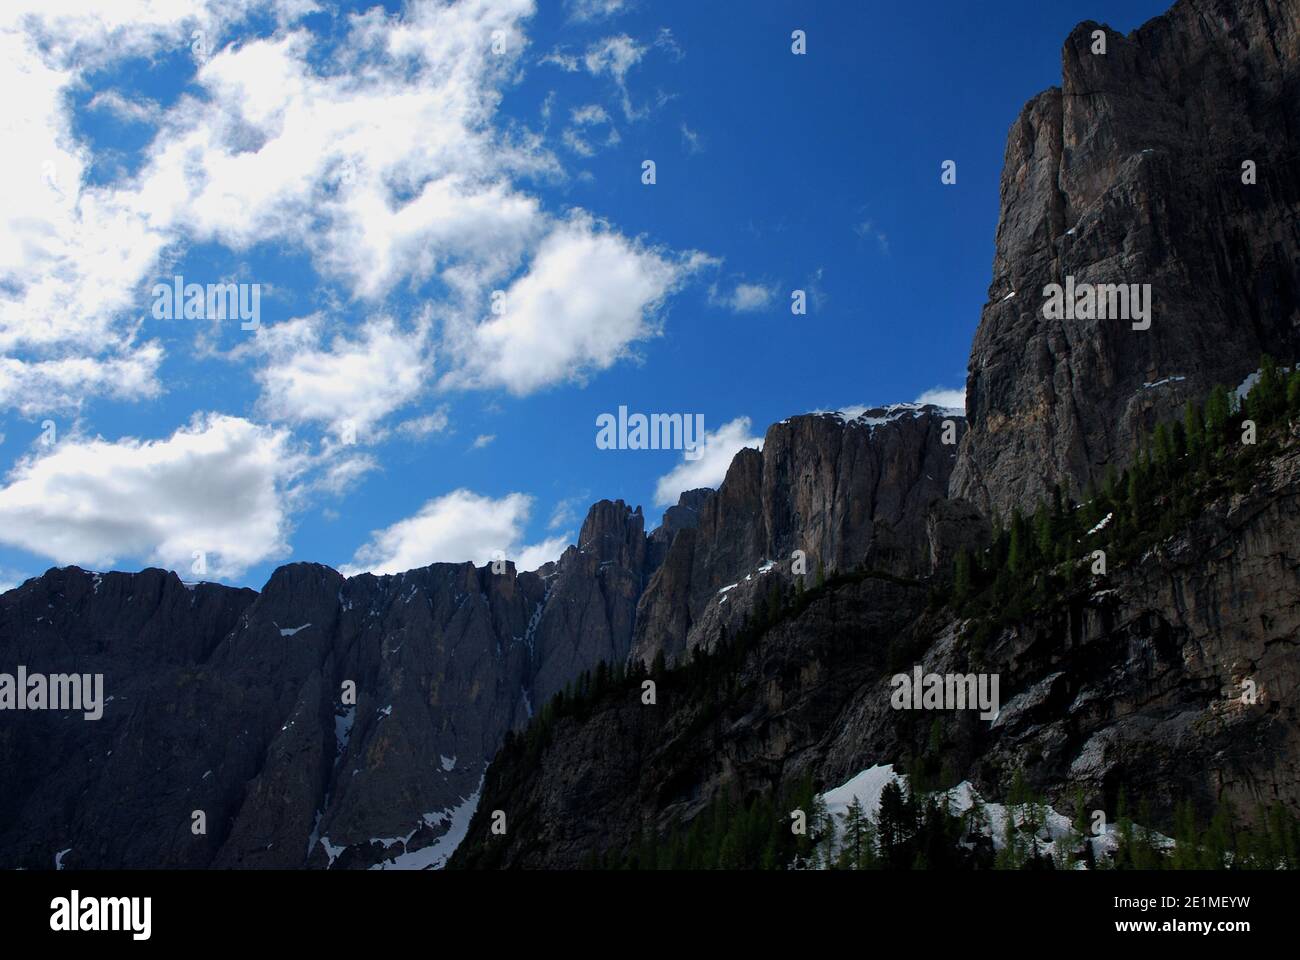 rocky mountain range with trees and blue sky Stock Photo